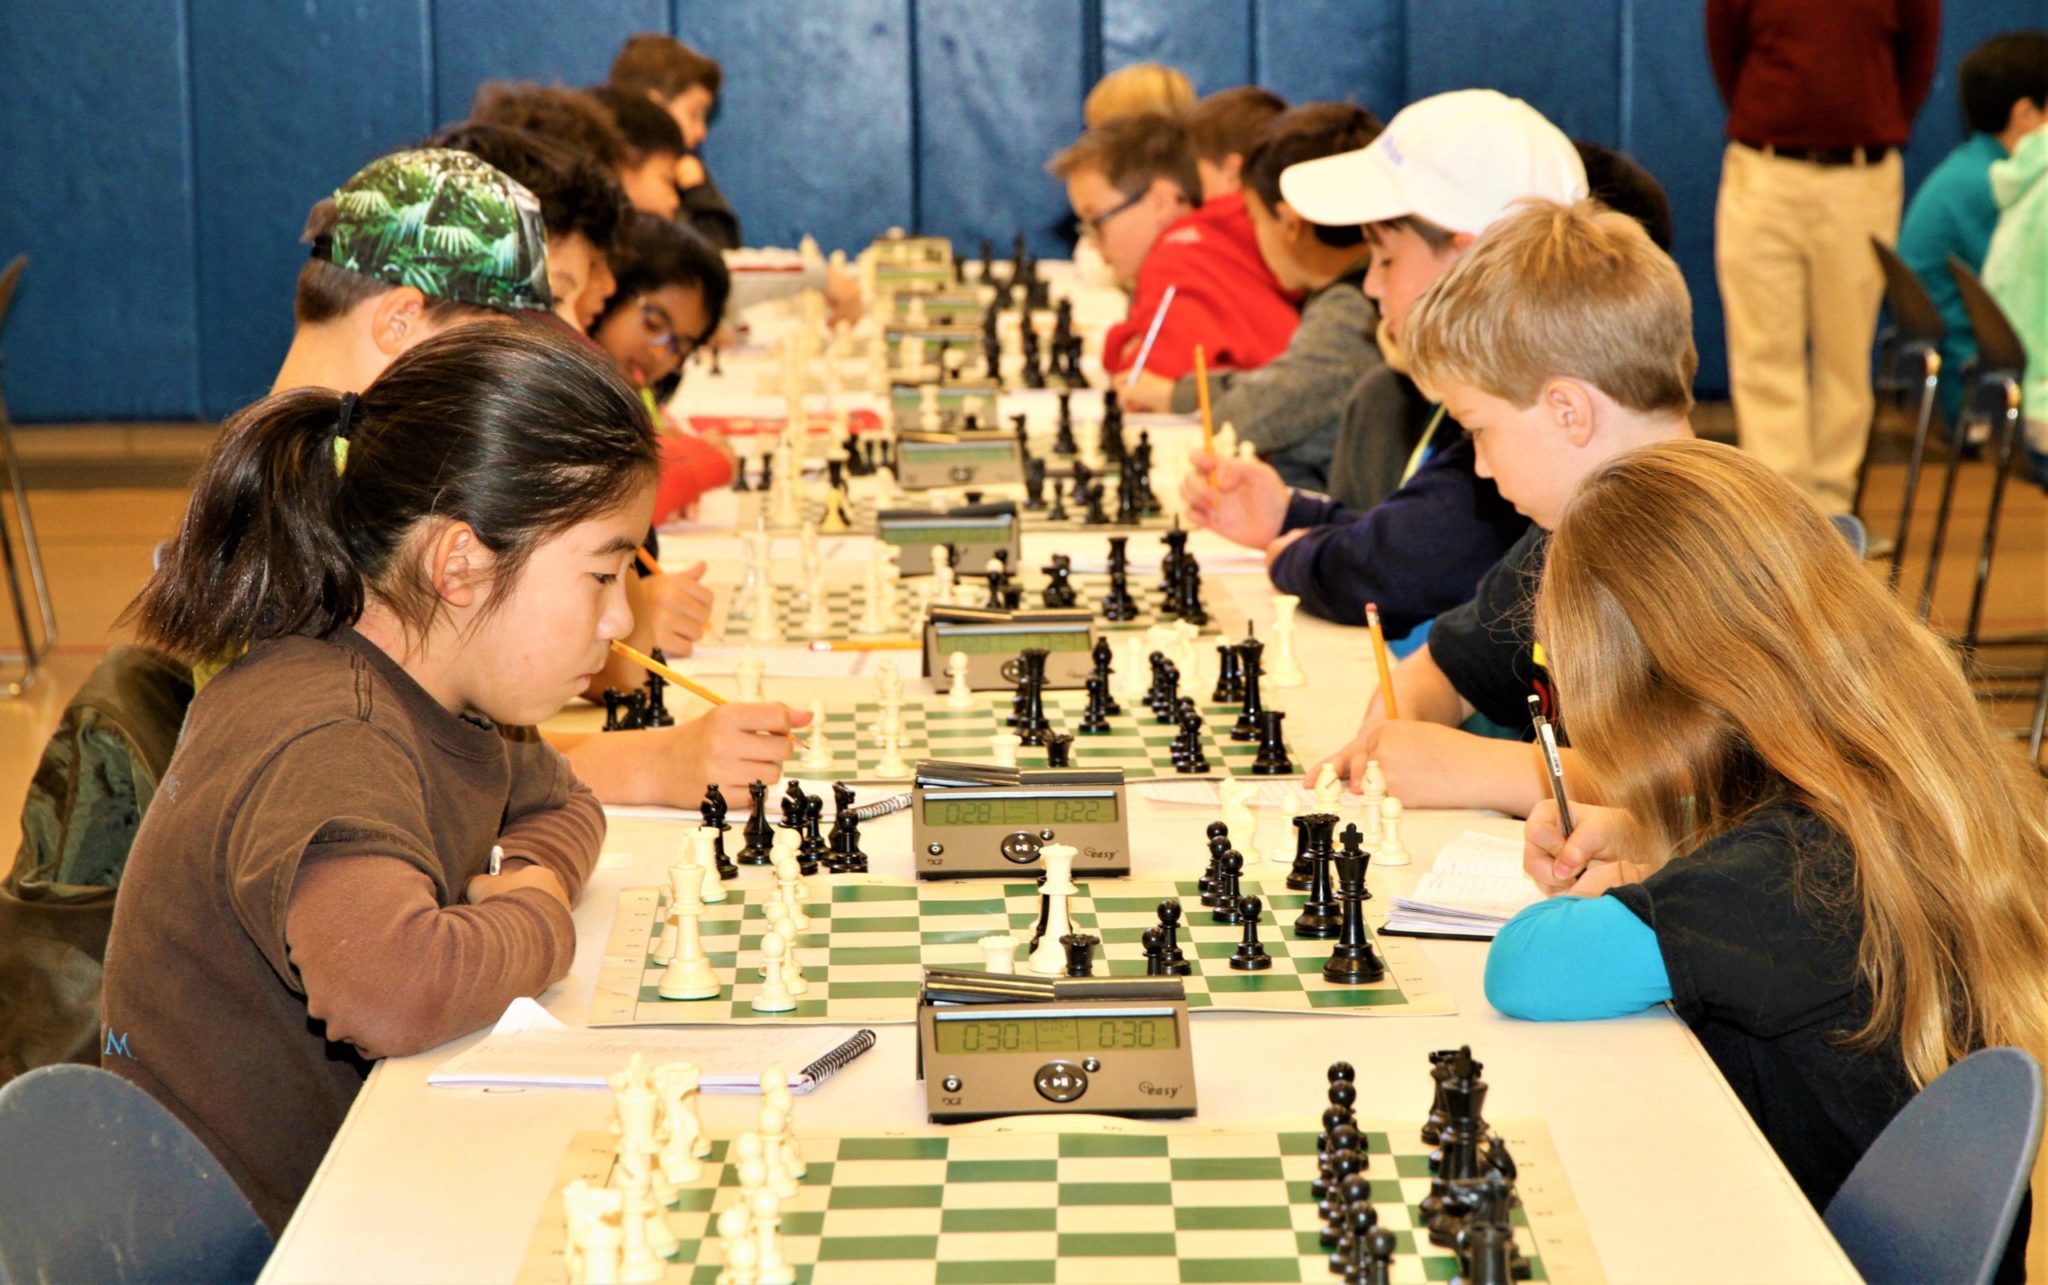 Tourney circuit returns with Winter Knight Scholastic Chess Tournament